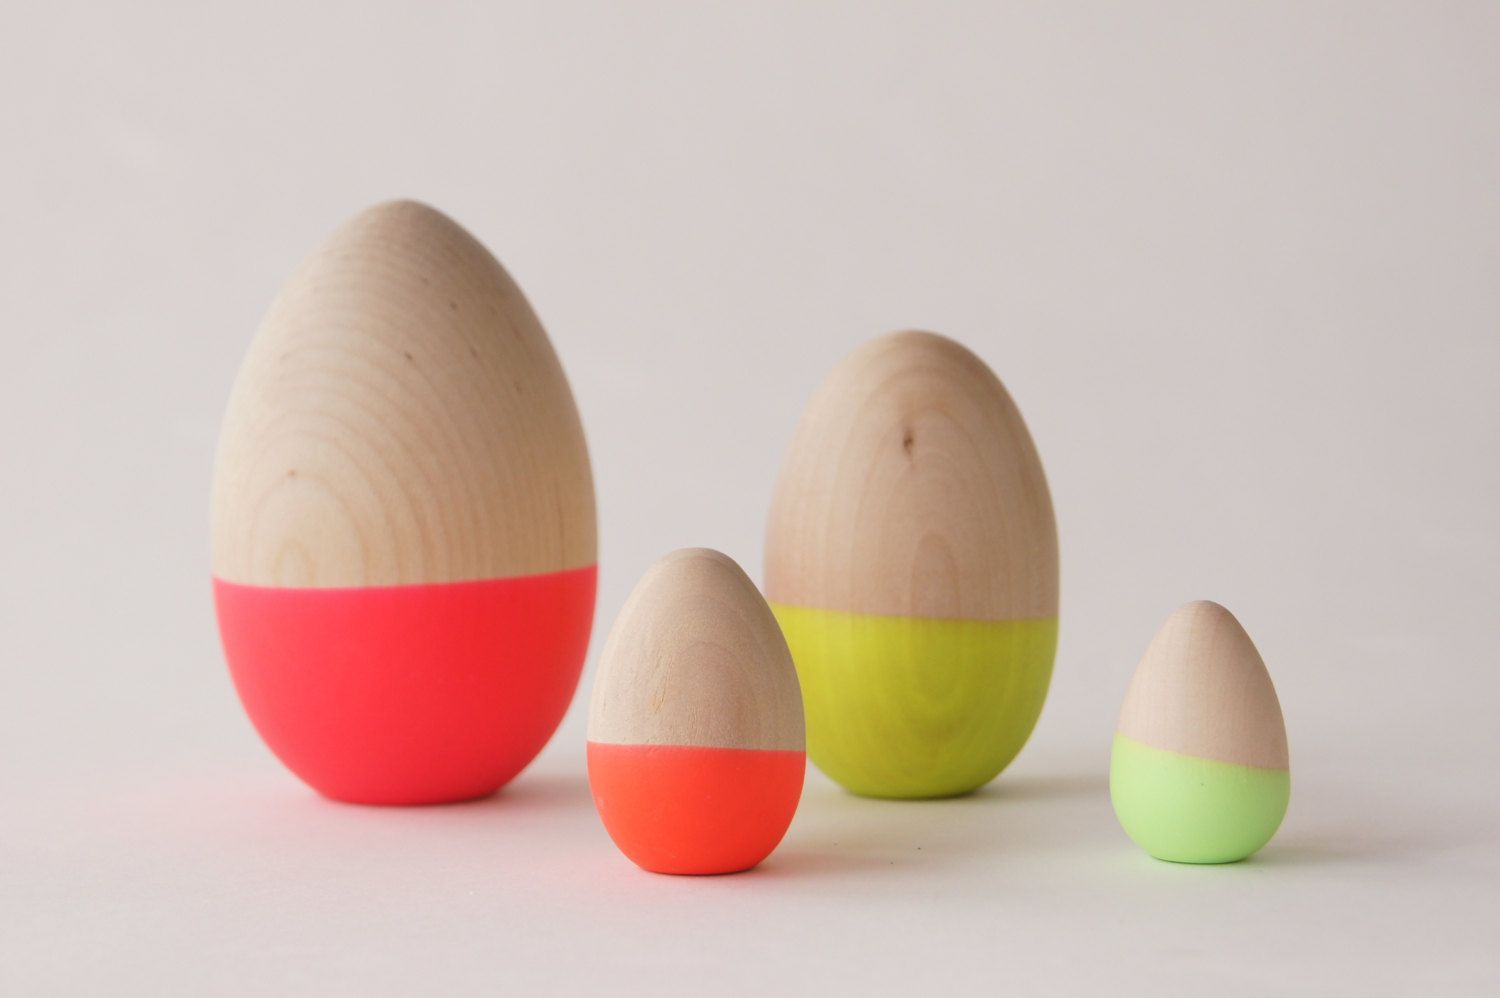 Neon Dipped Eggs Easter Decor by WindandWillowHome on Etsy